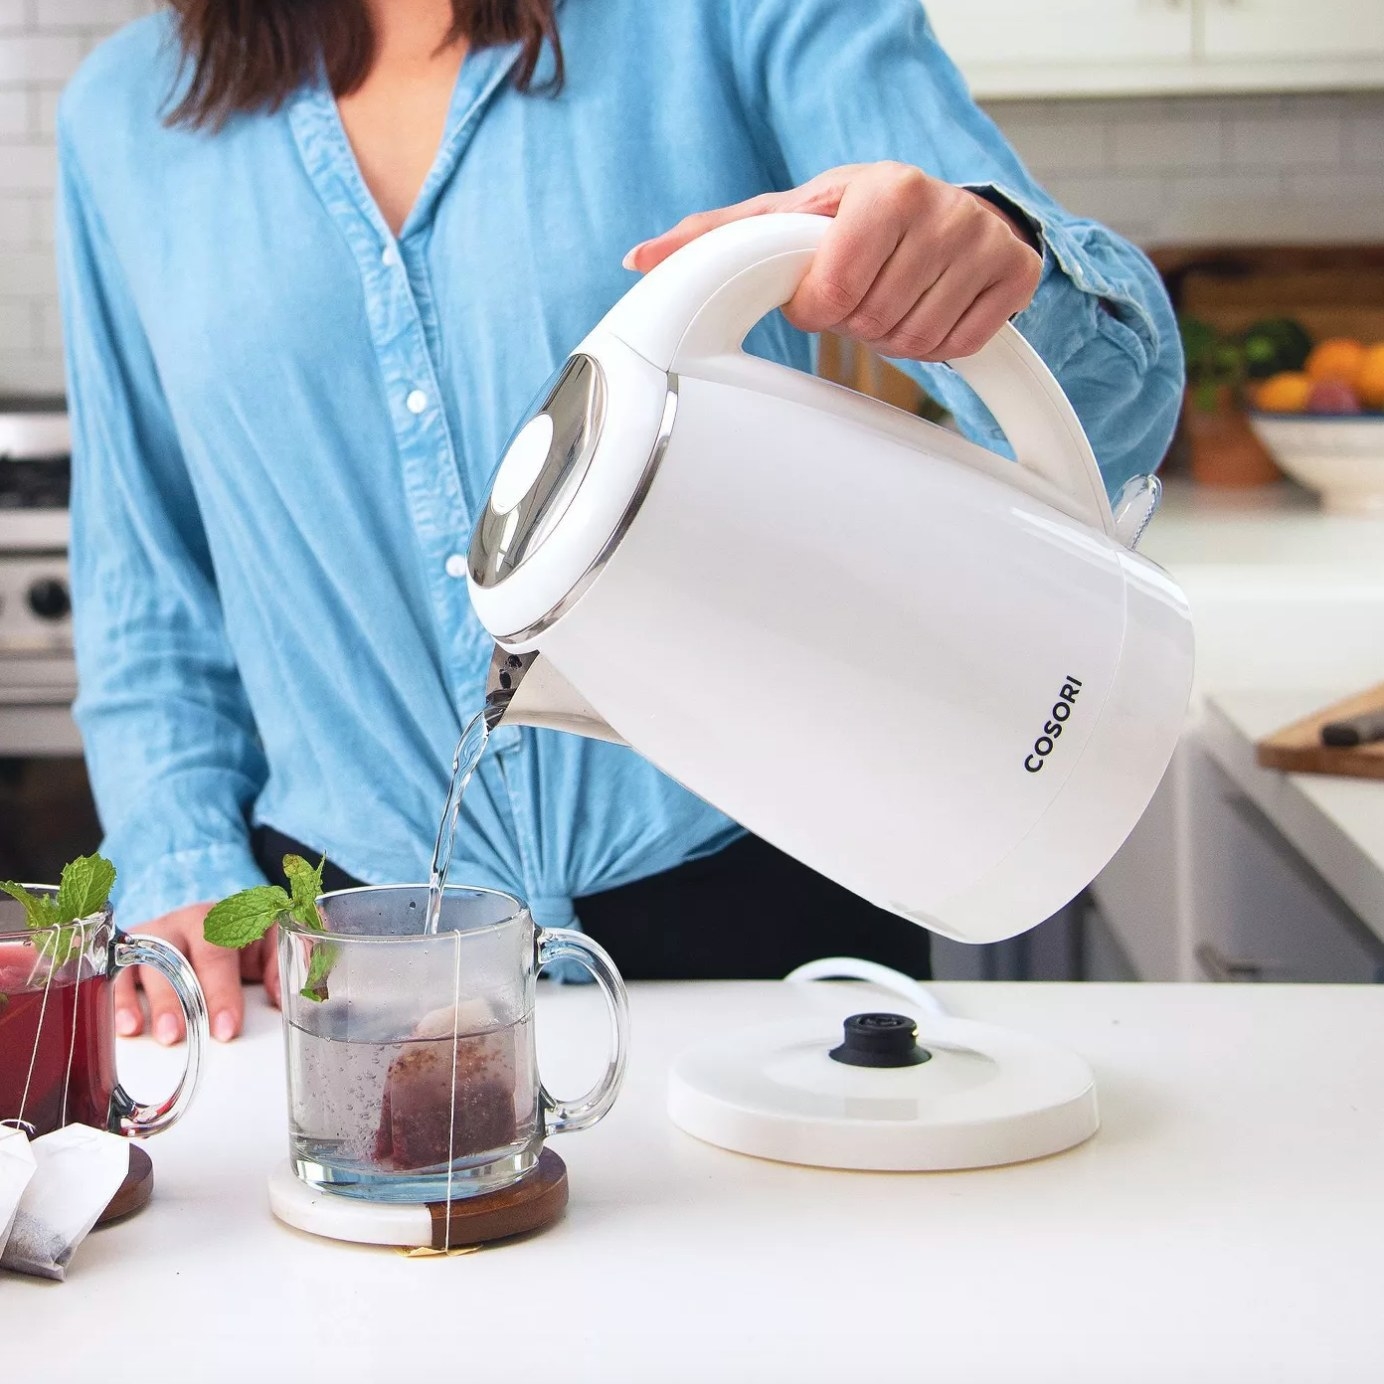 model using the white electric kettle